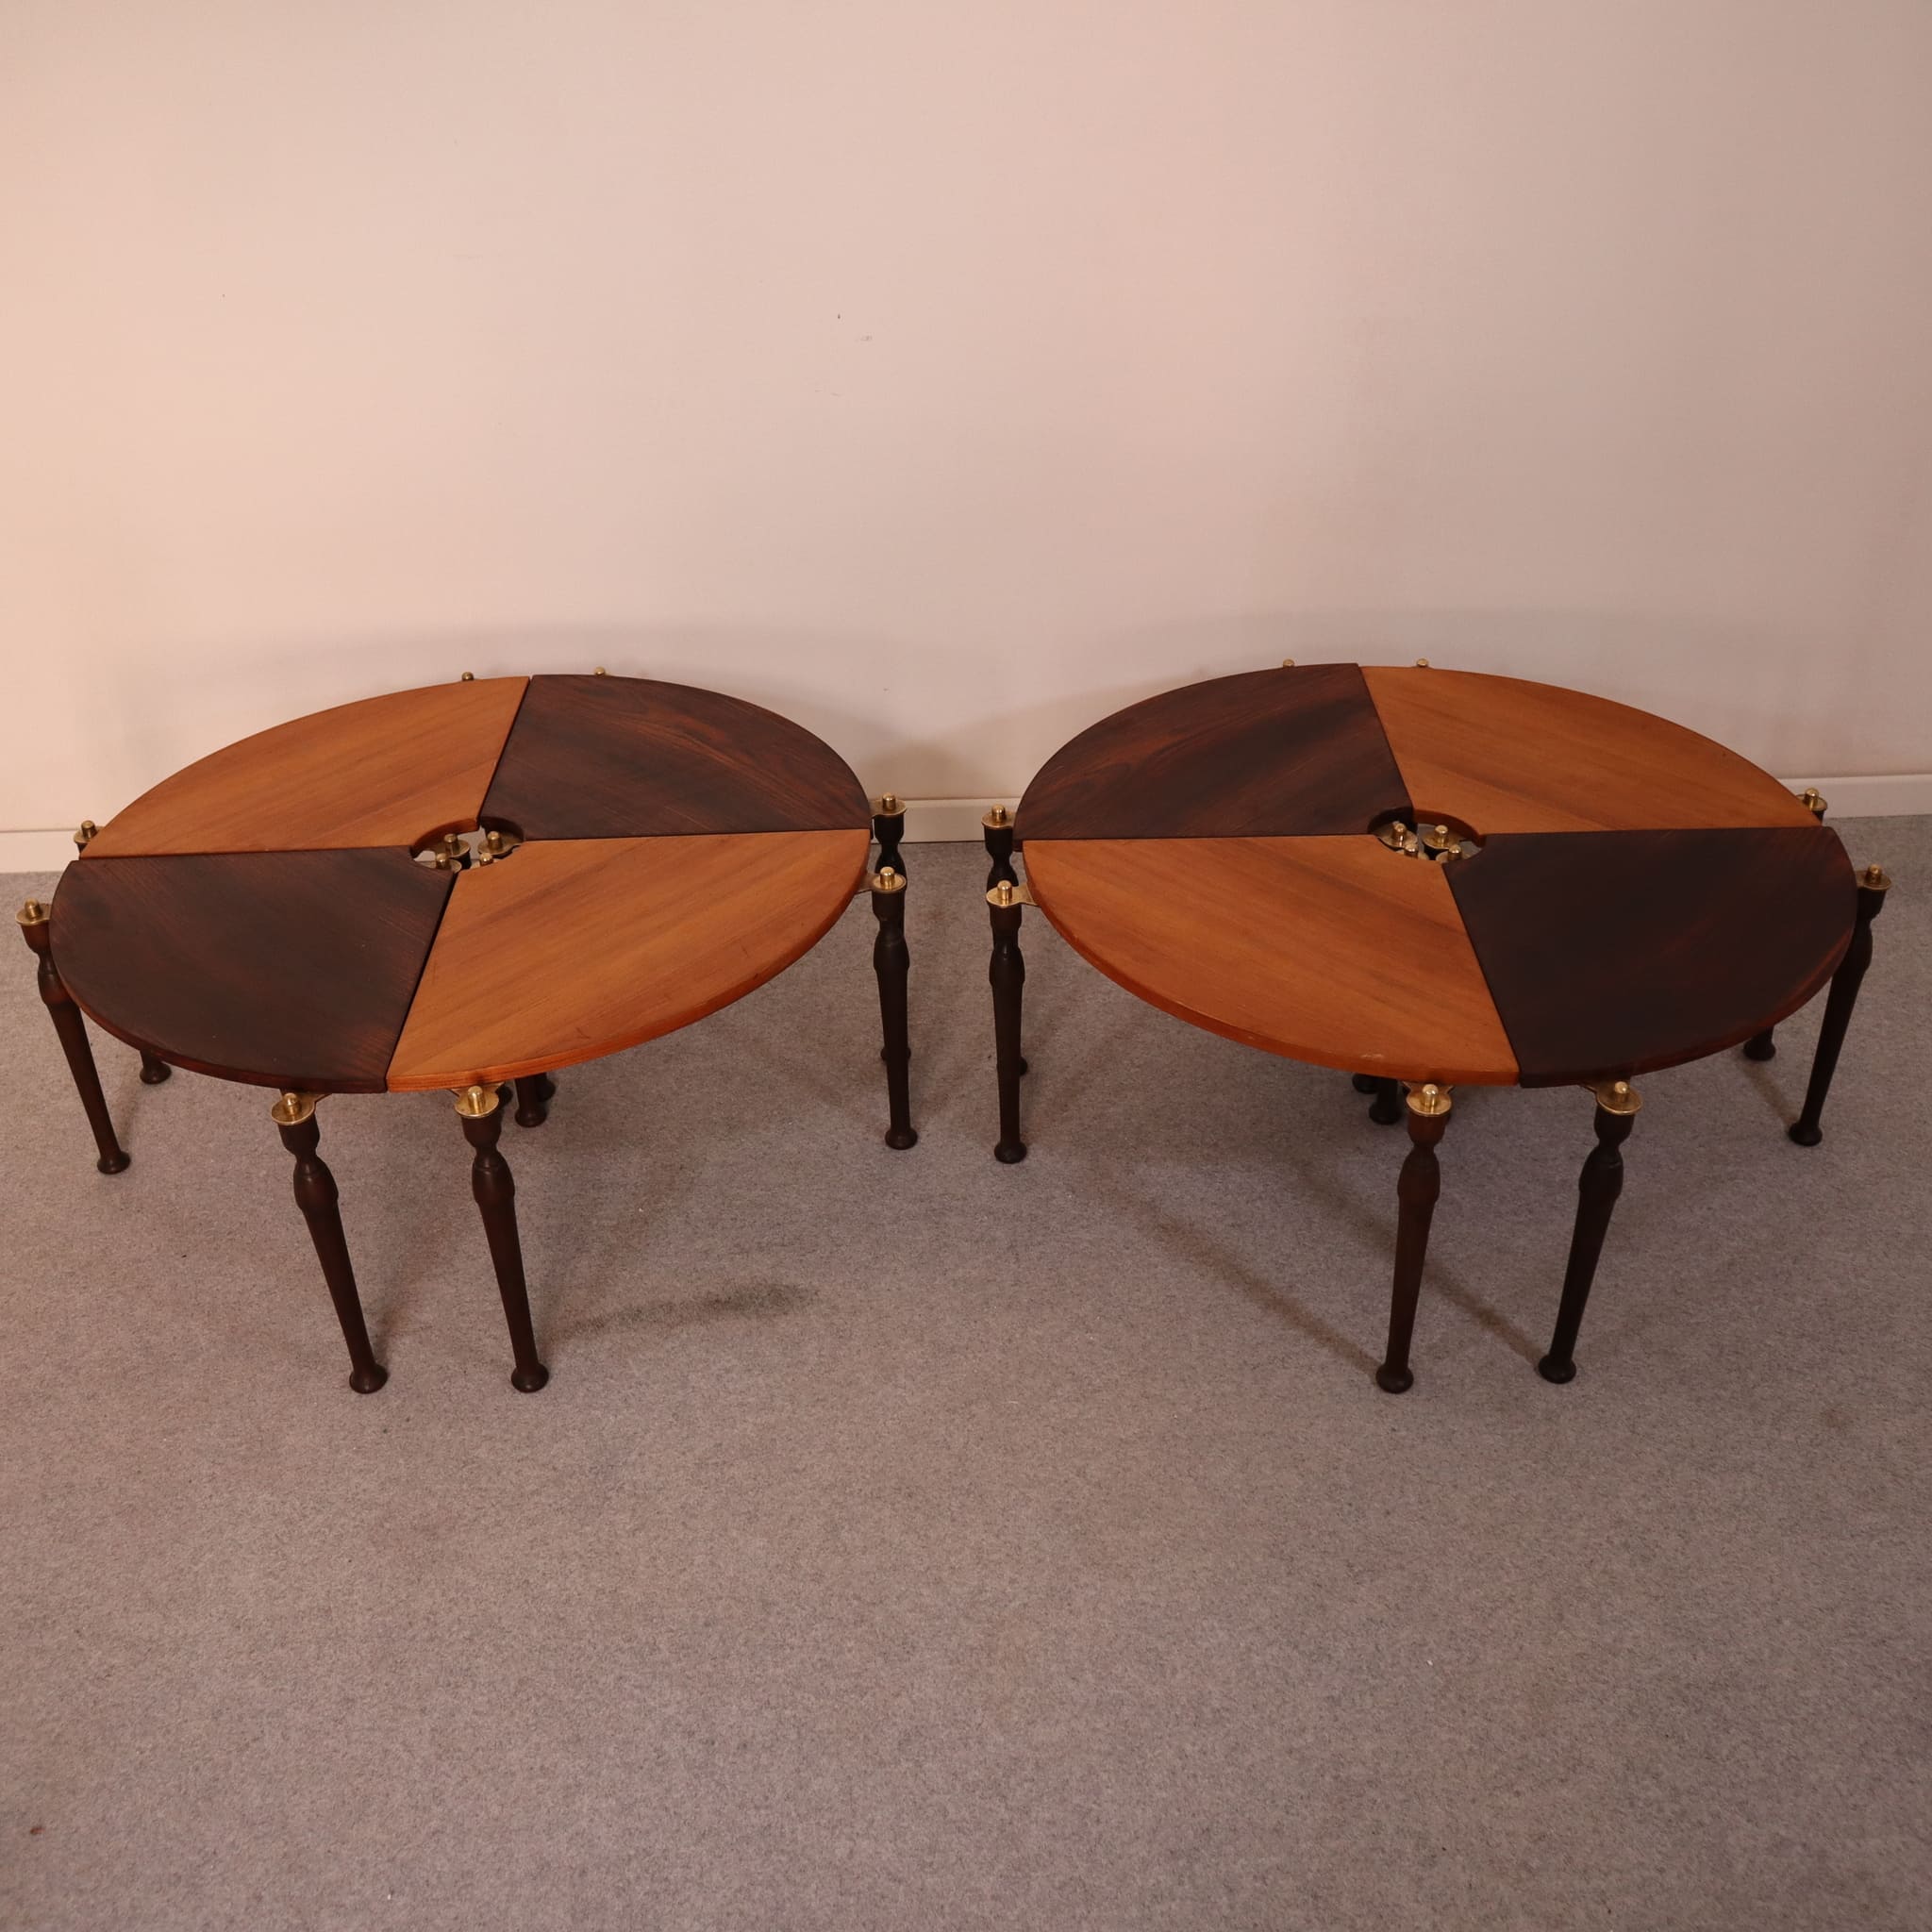 visionidepoca-visioni-depoca-pair-of-tables-library-corner-brass-removable-two-tone-60s-made-italy-componibili-furnishings-vintage-1